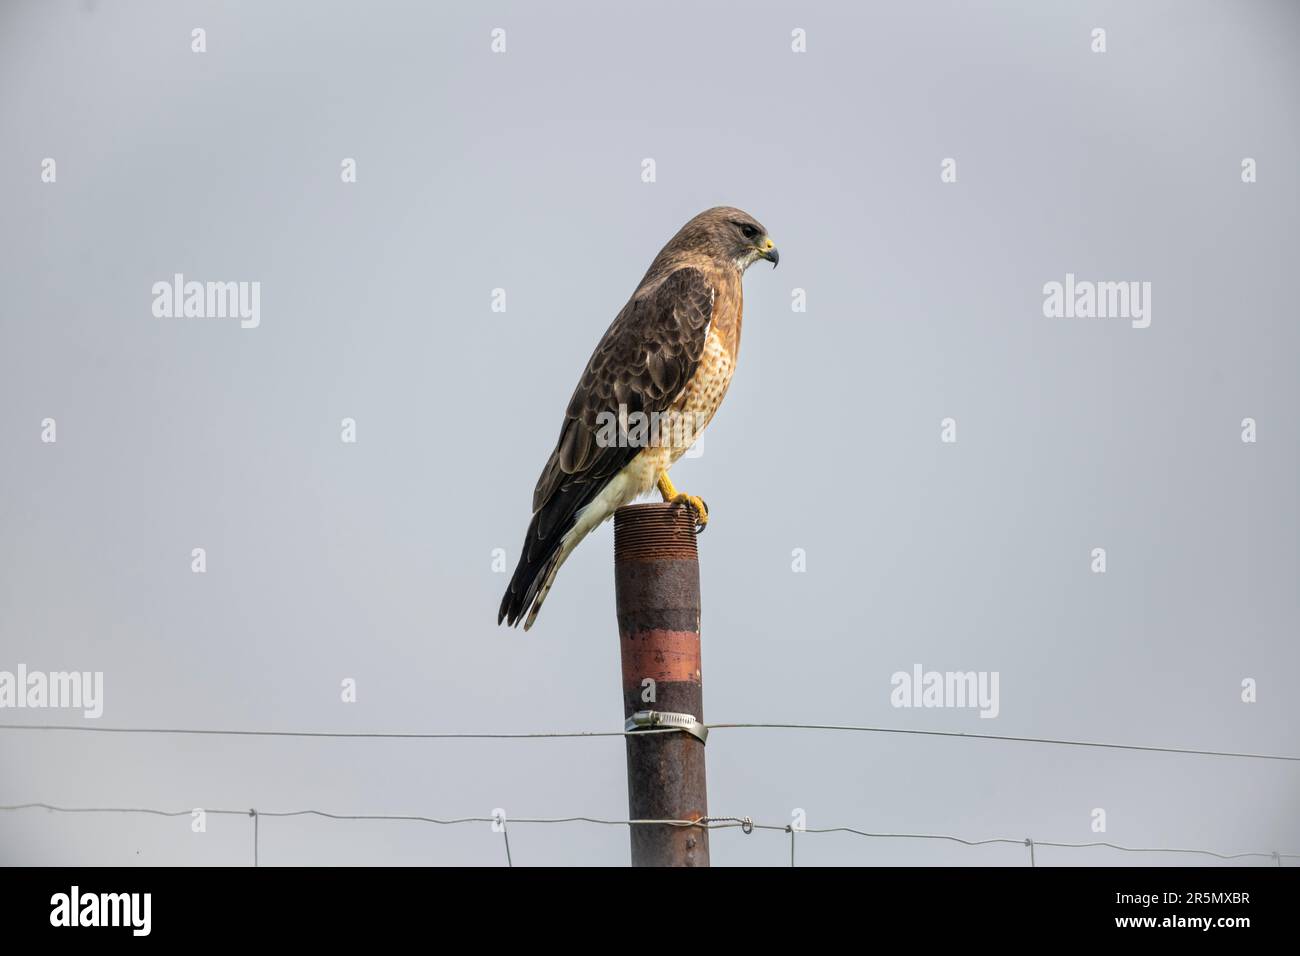 Swainson's hawk (Buteo swainsoni) perched on a fence post, South of Highway 22x, Calgary,  Alberta, Canada, Stock Photo